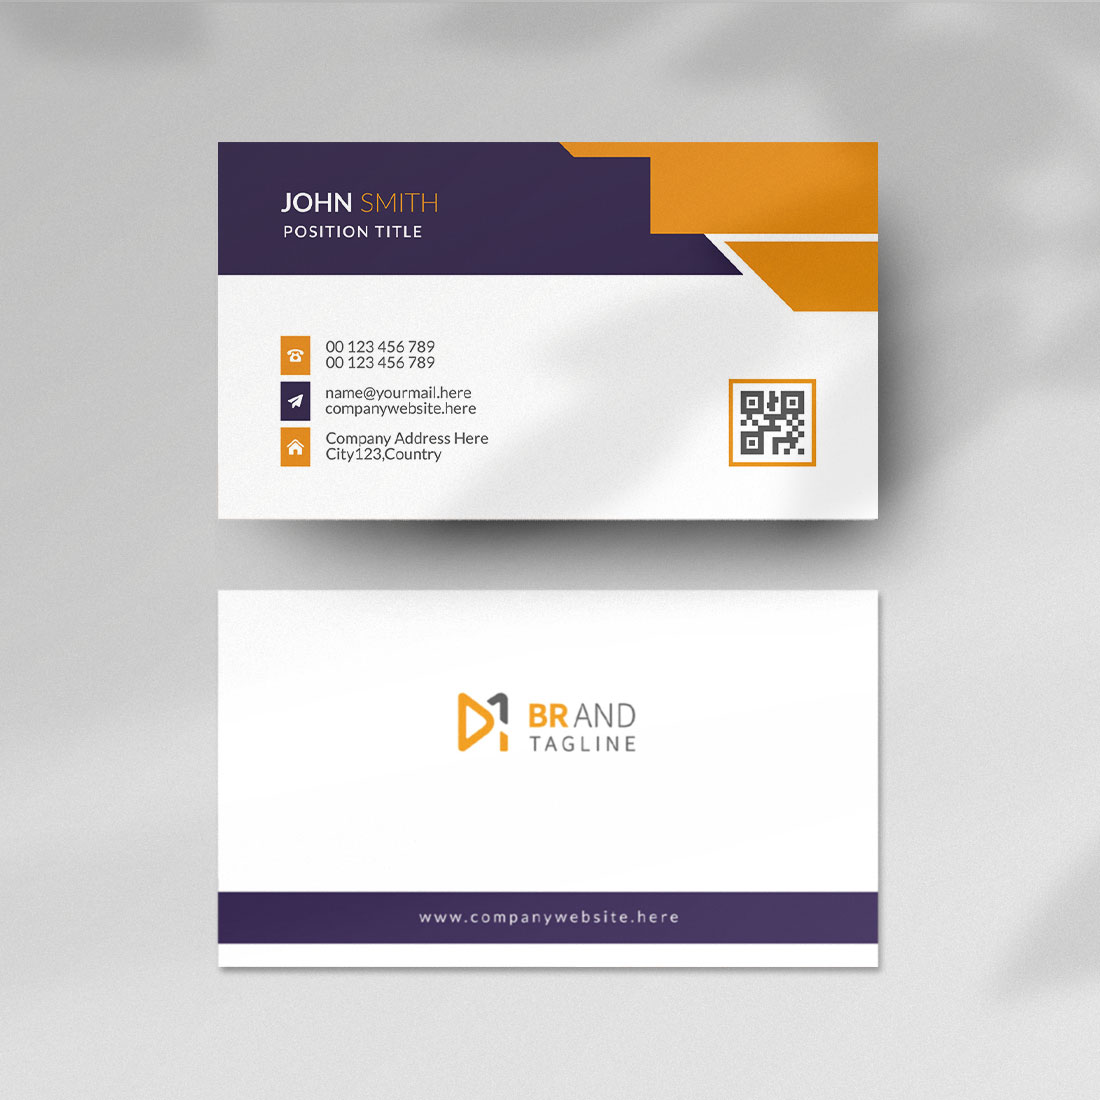 Clean and minimalist business card design template cover image.